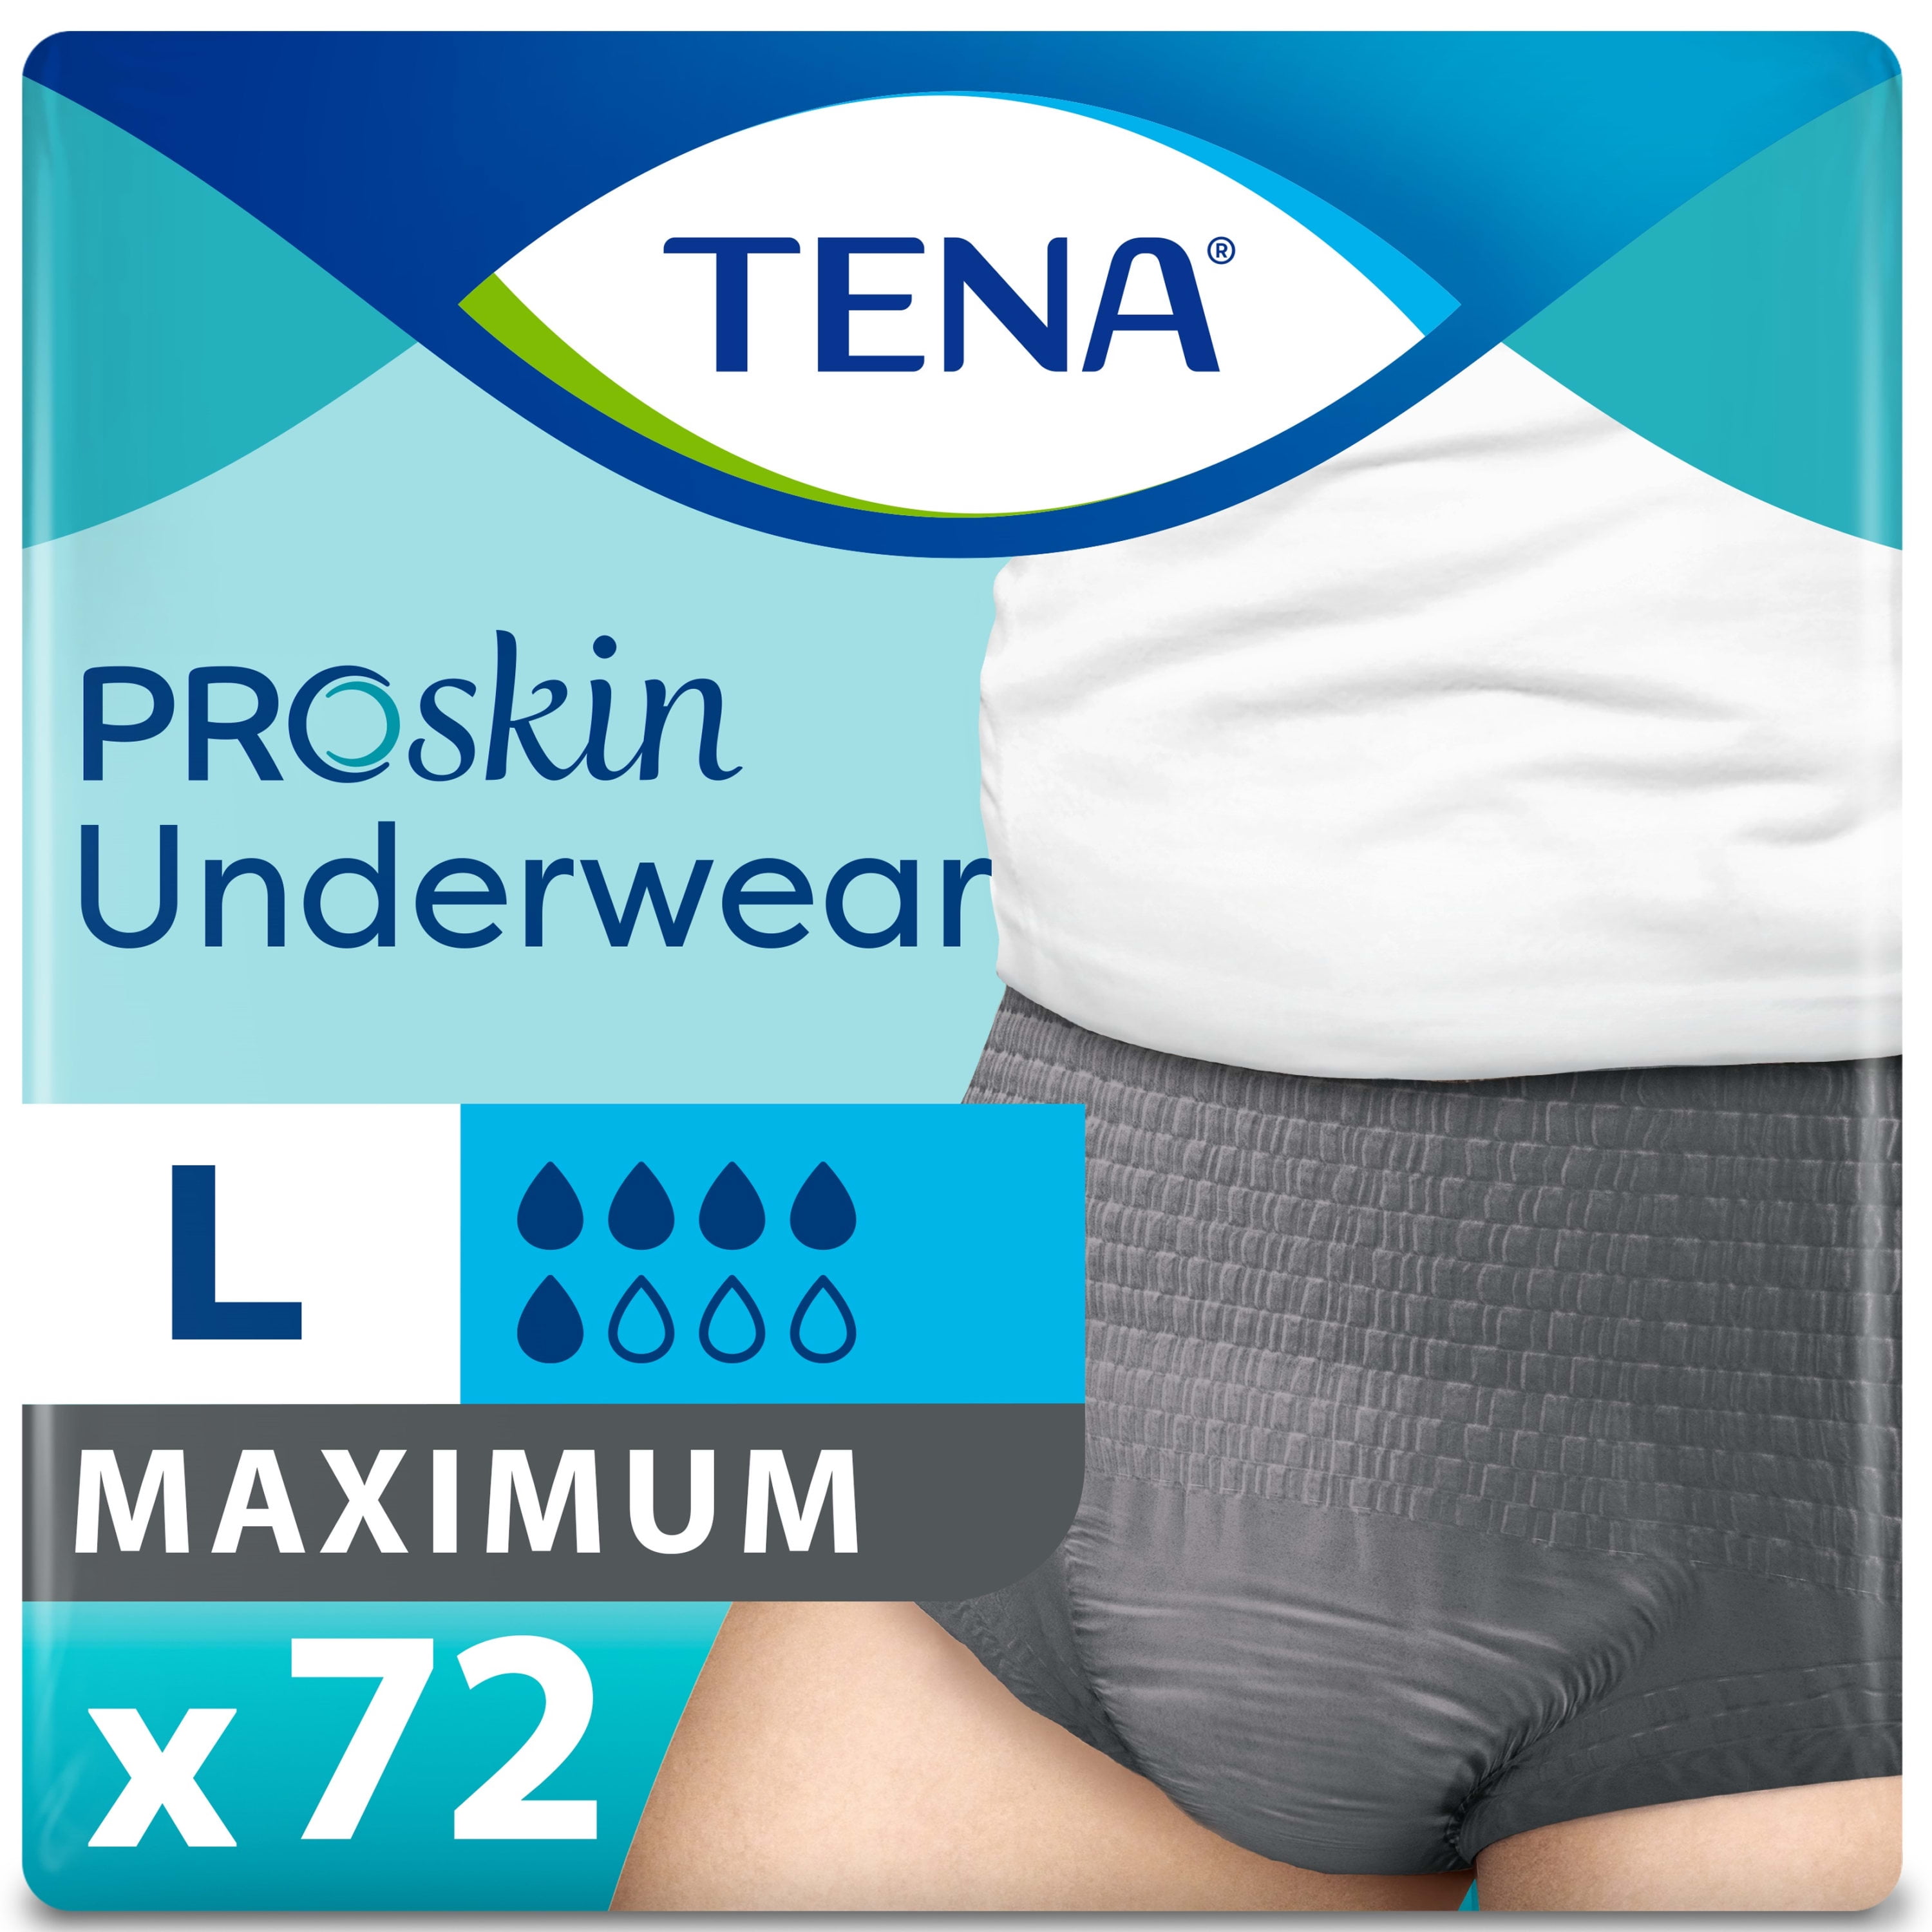 Product Of Depend Fit Flex Large Maximum Absorbency Underwear For Men 84 ct.  